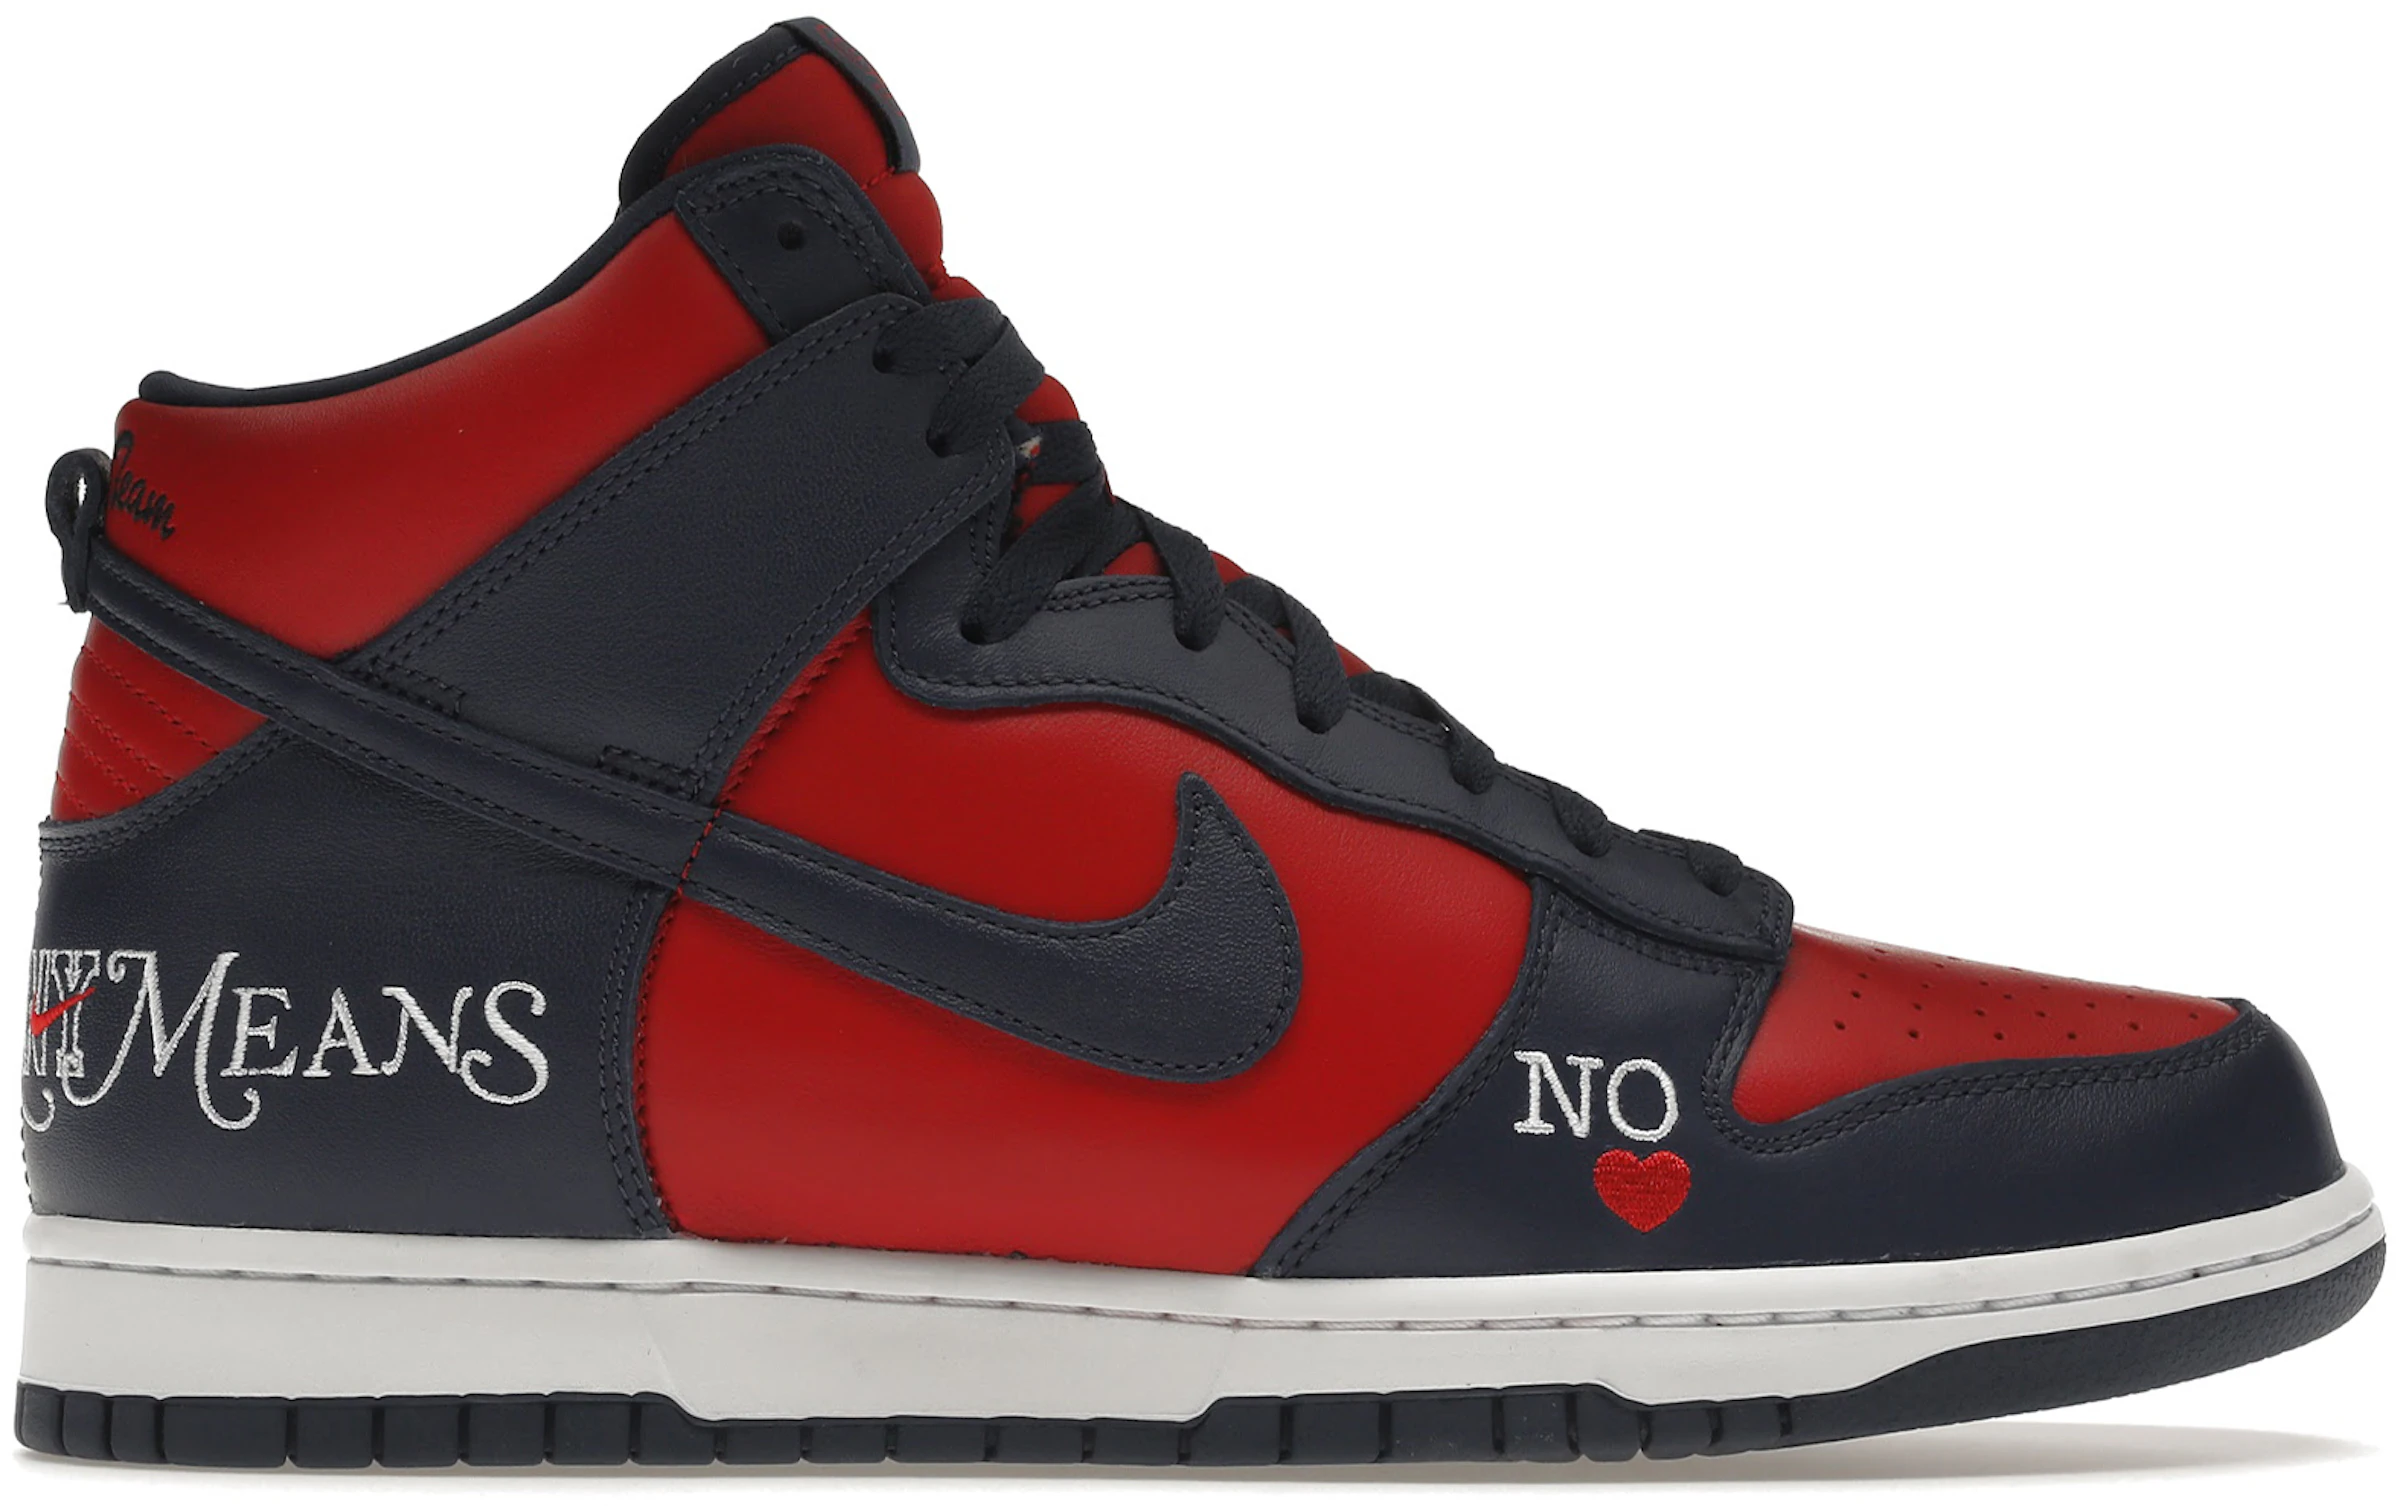 Nike SB Dunk High Supreme Any Means Navy - -